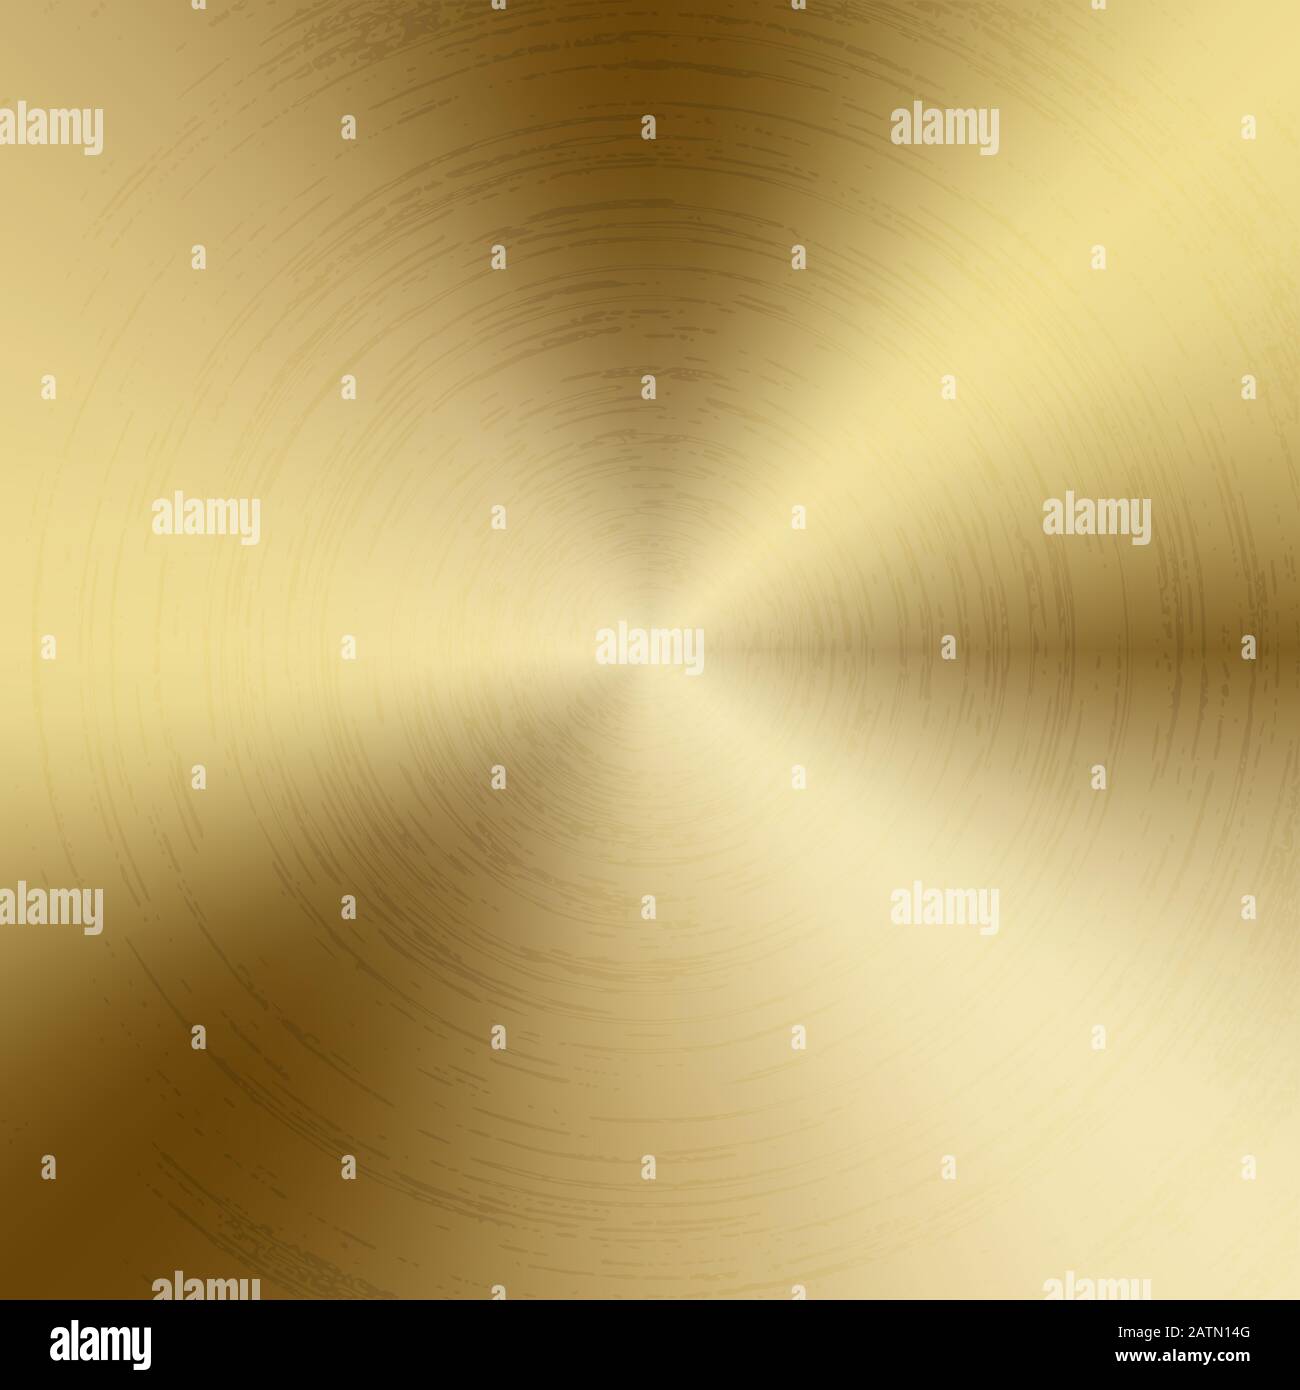 Radial polished texture golden metal background. Vector textured technology gold color background with circular polished, brushed concentric texture. Stock Vector